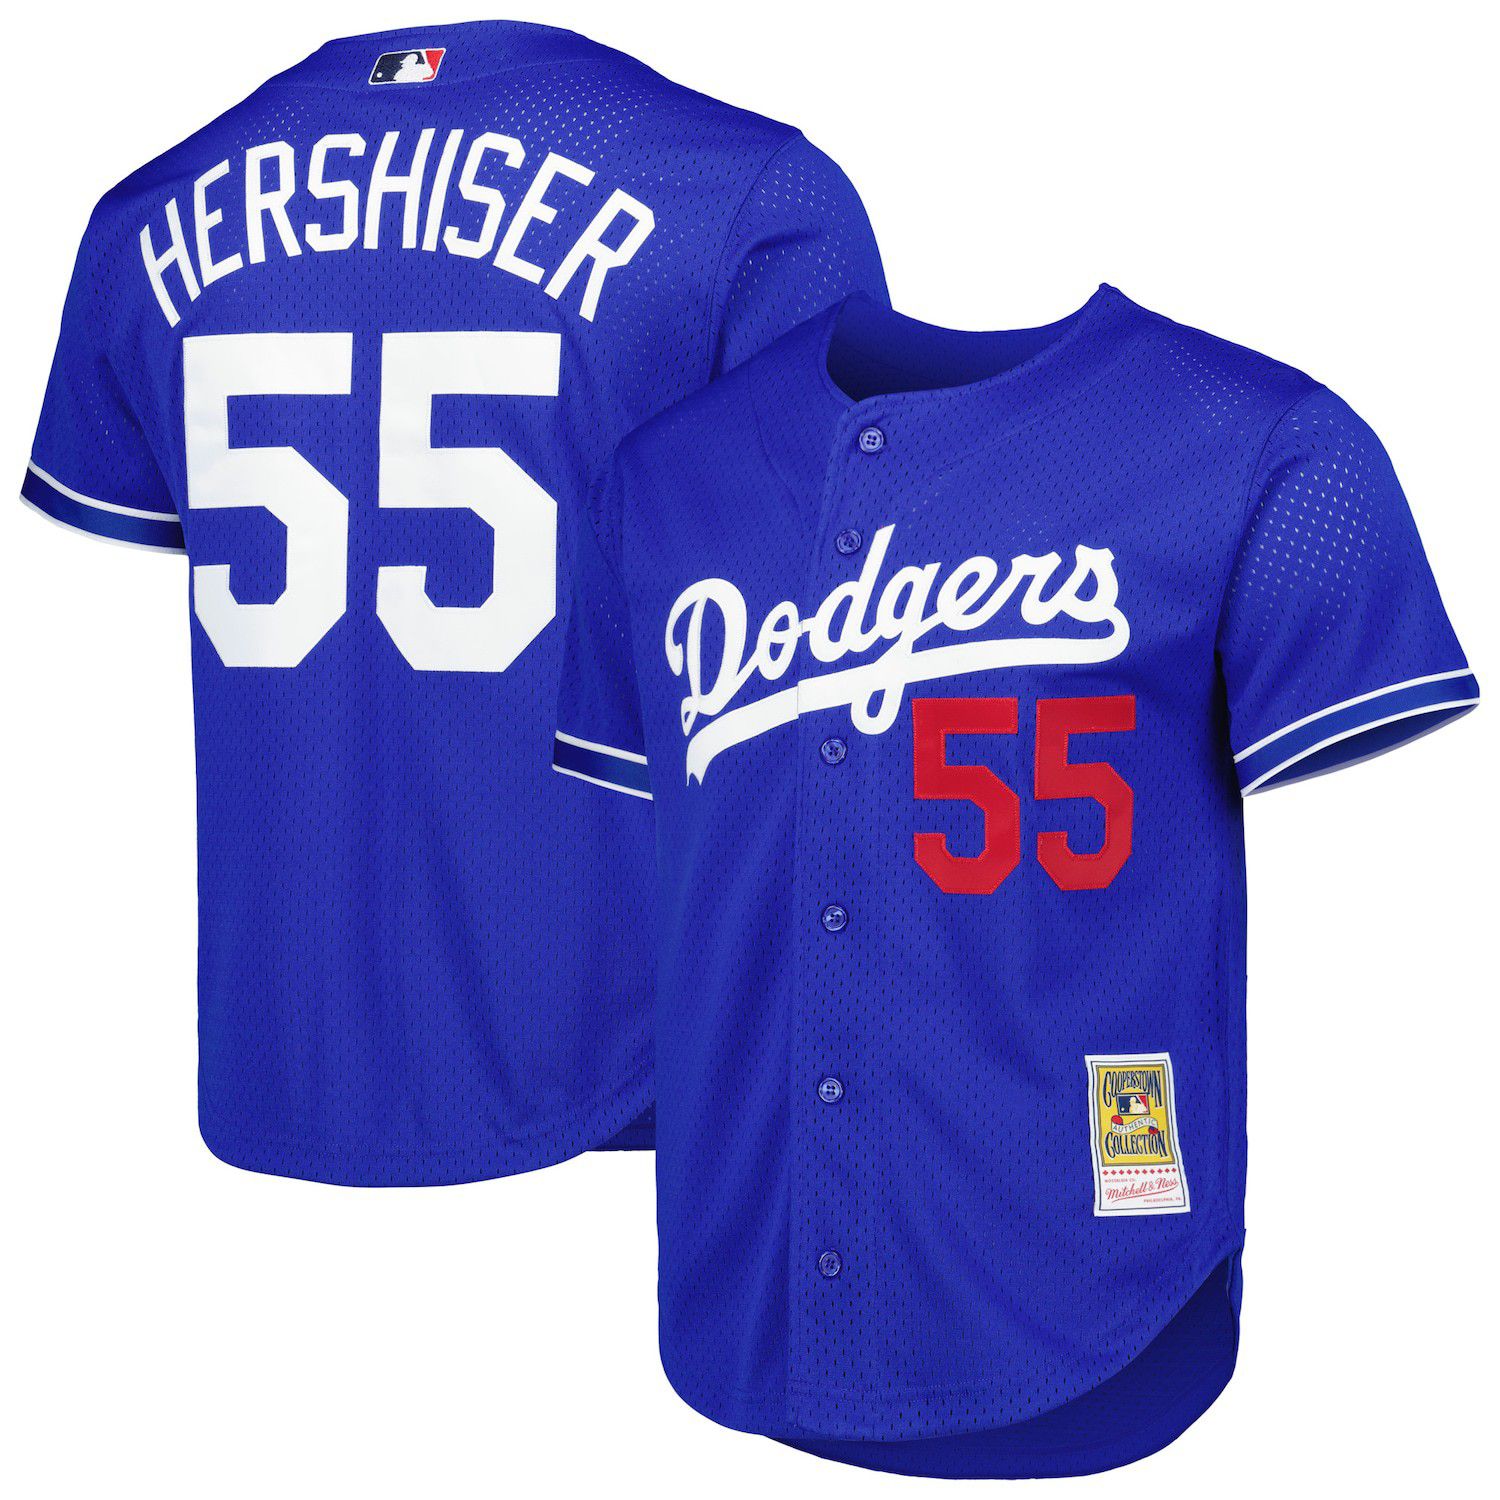 Dodgers Throwback Jersey